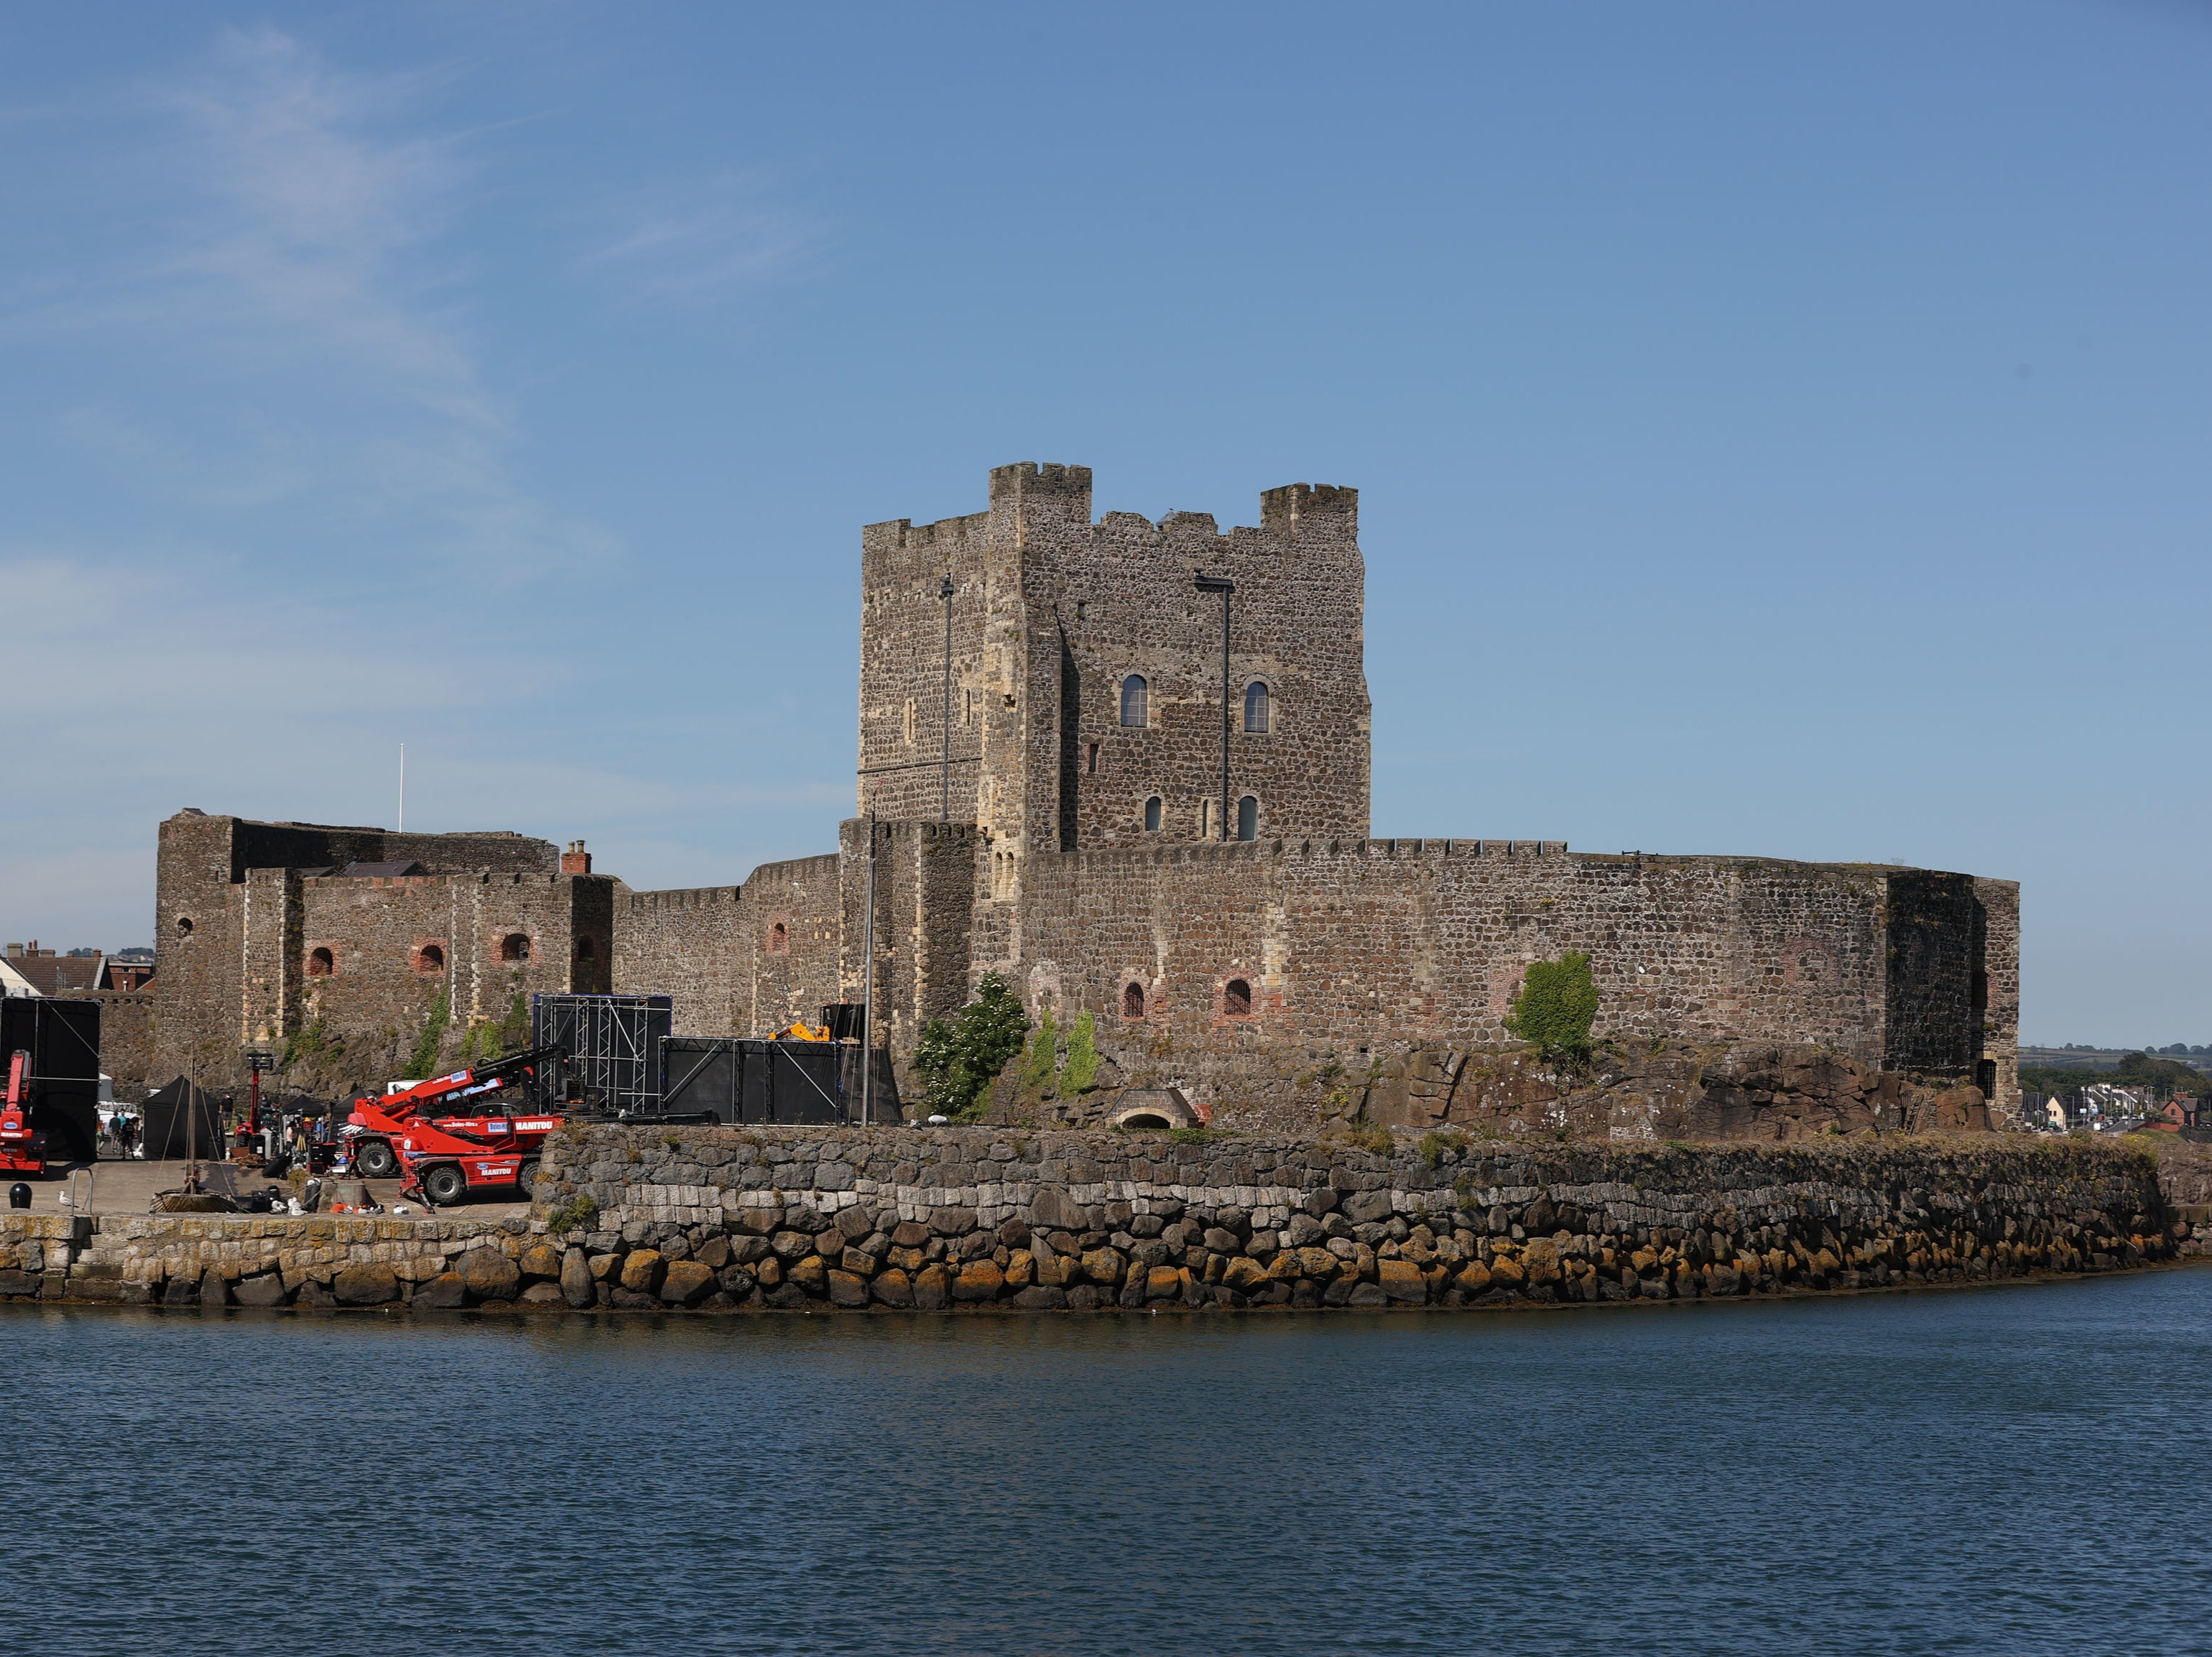 Around 200 people were at the funfair in the car park for Carrickfergus Castle